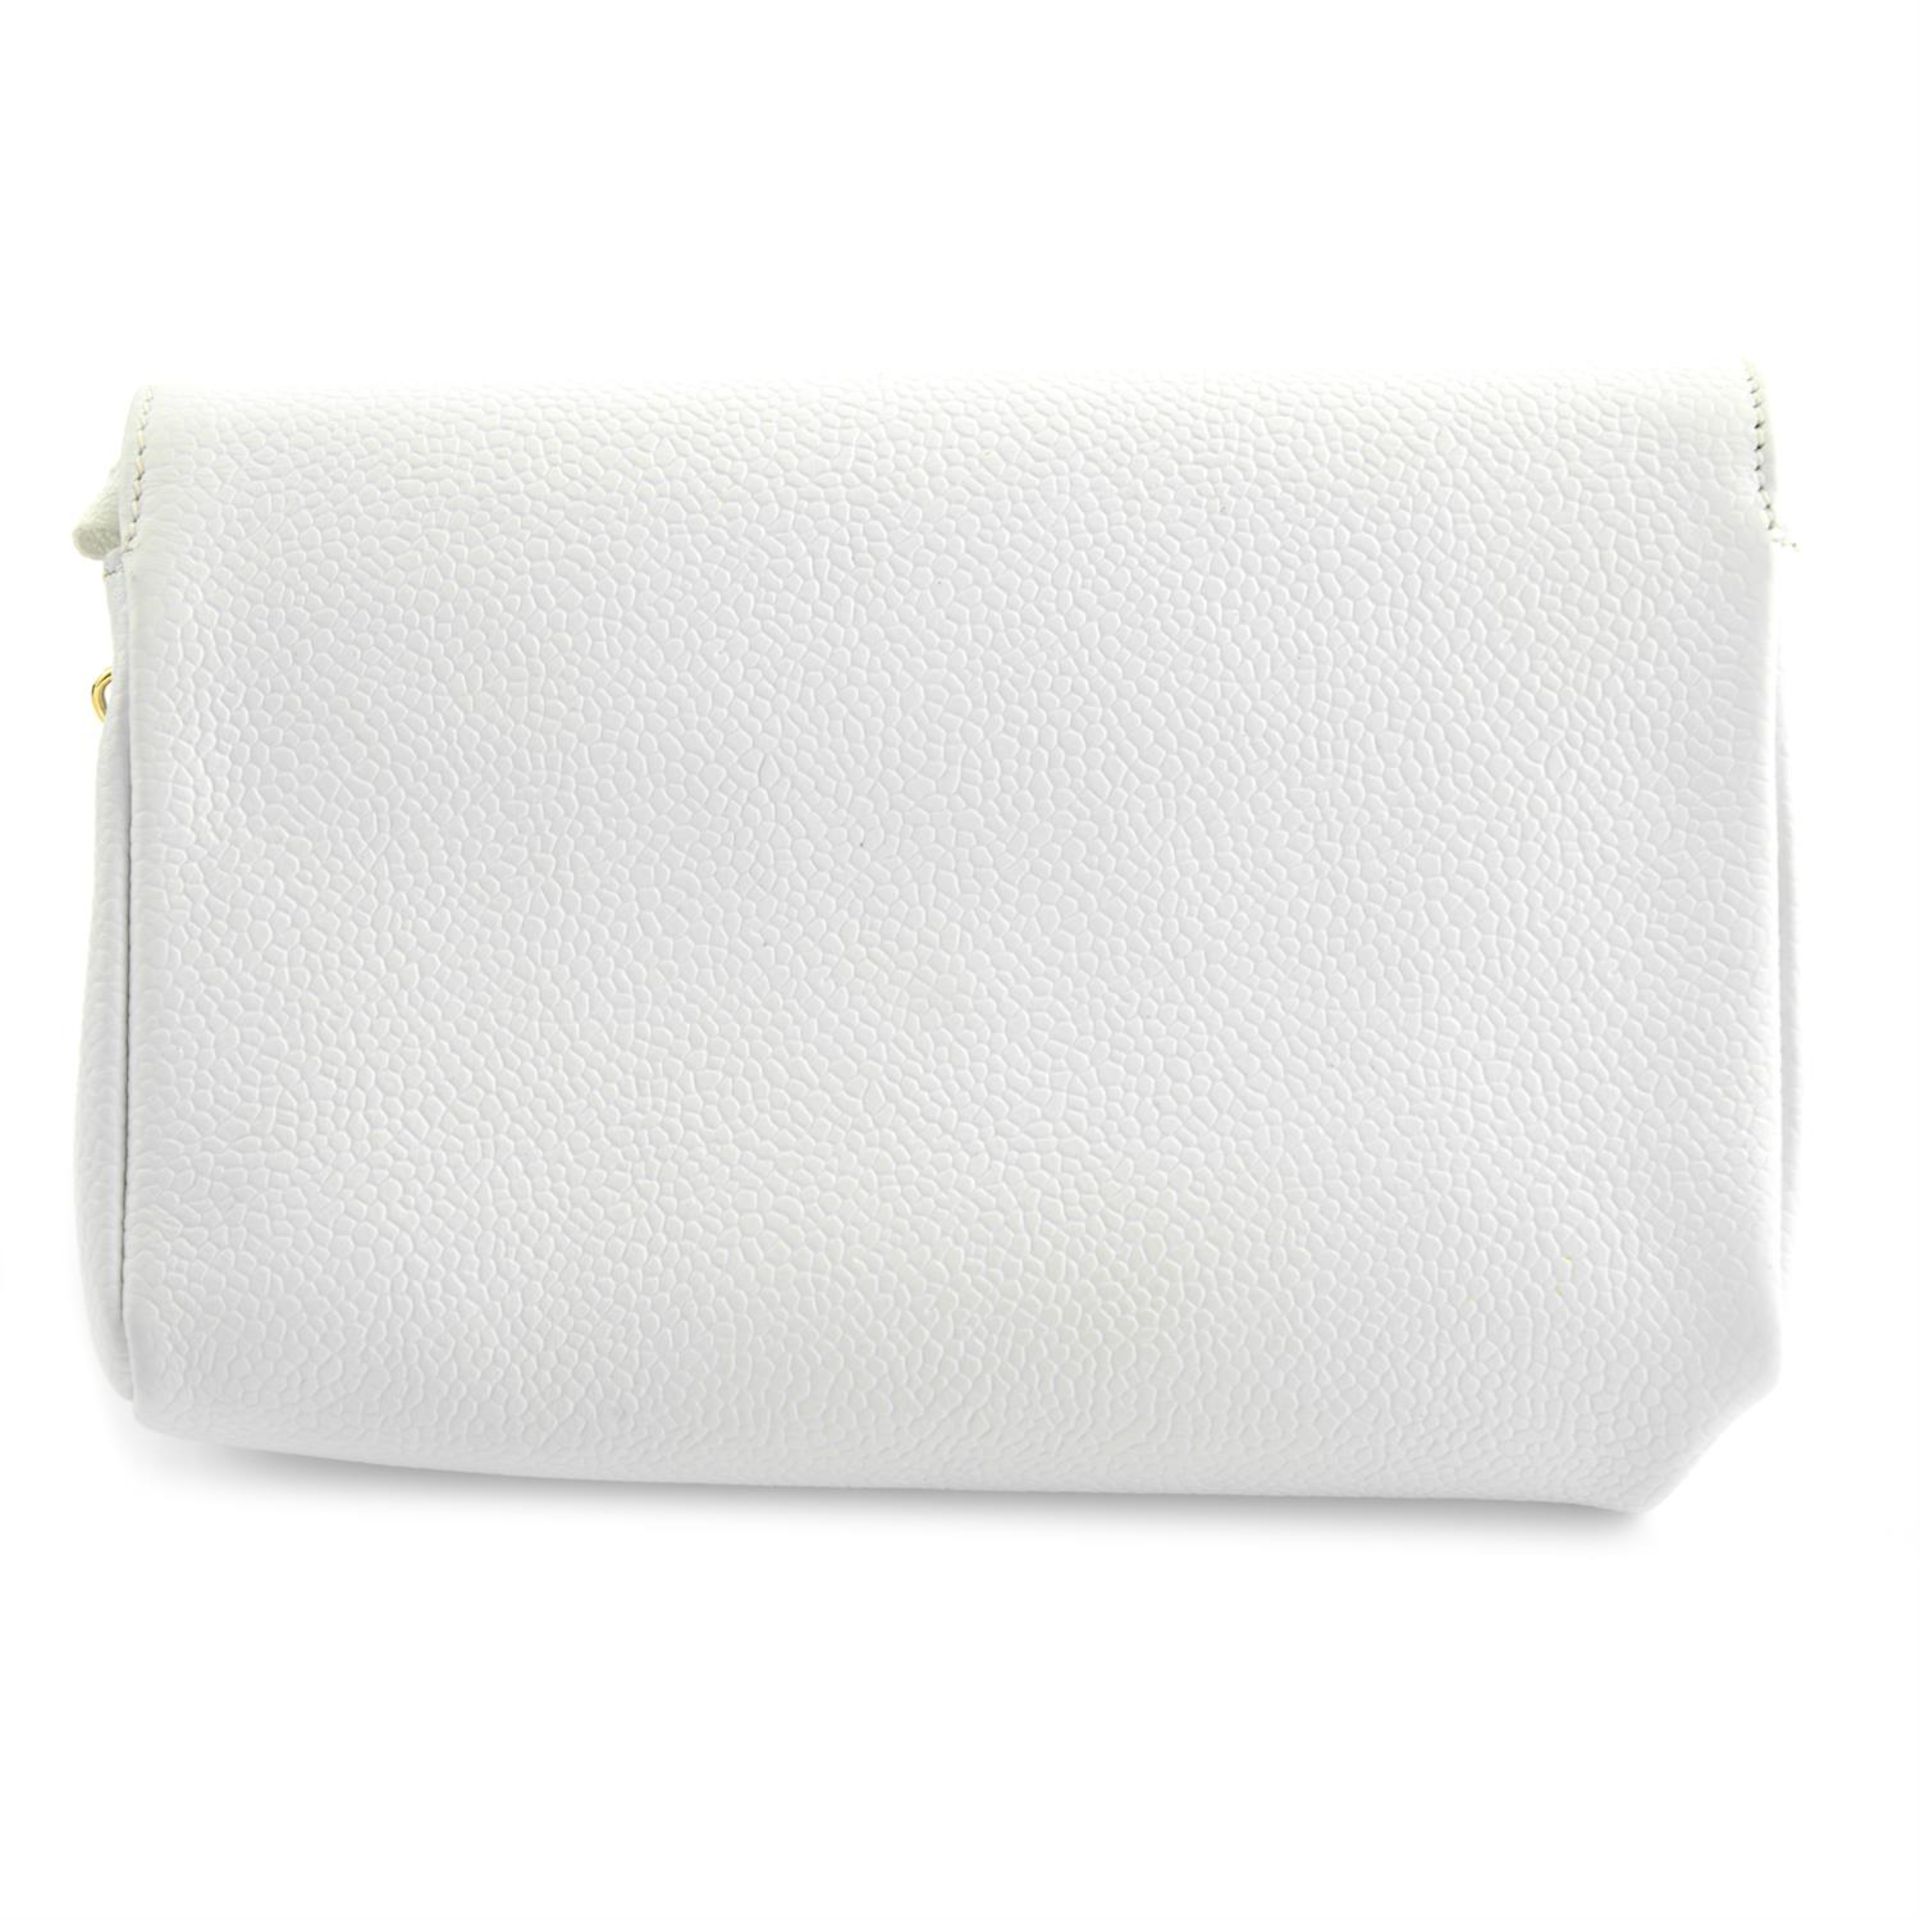 CHANEL - a 1996 white caviar leather cosmetic pouch. - Image 2 of 4